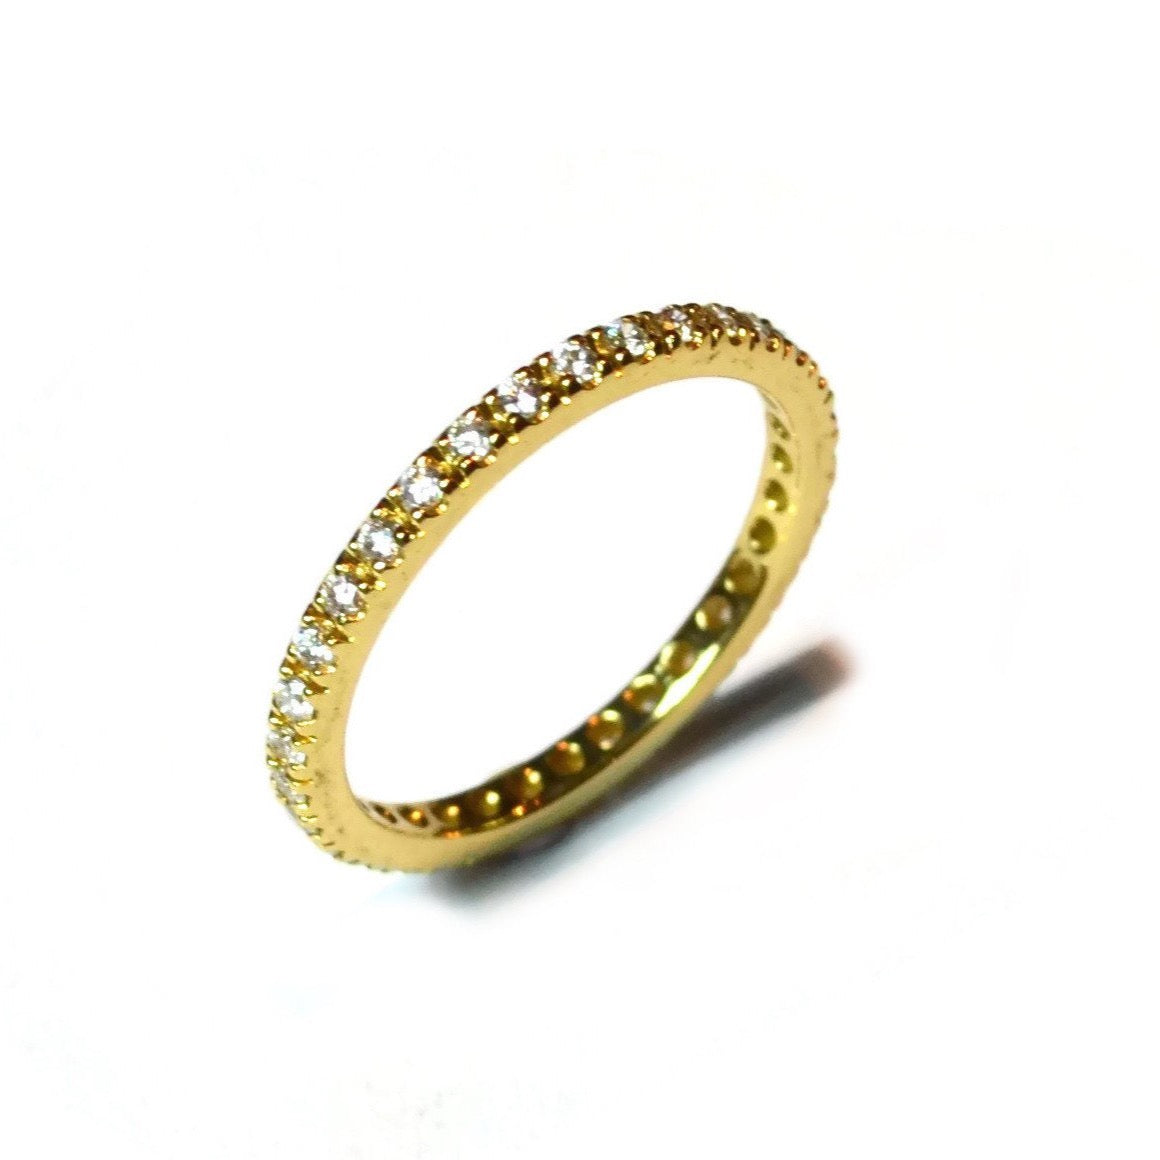 A & Furst - France Eternity Band Ring with White Diamonds all around ...